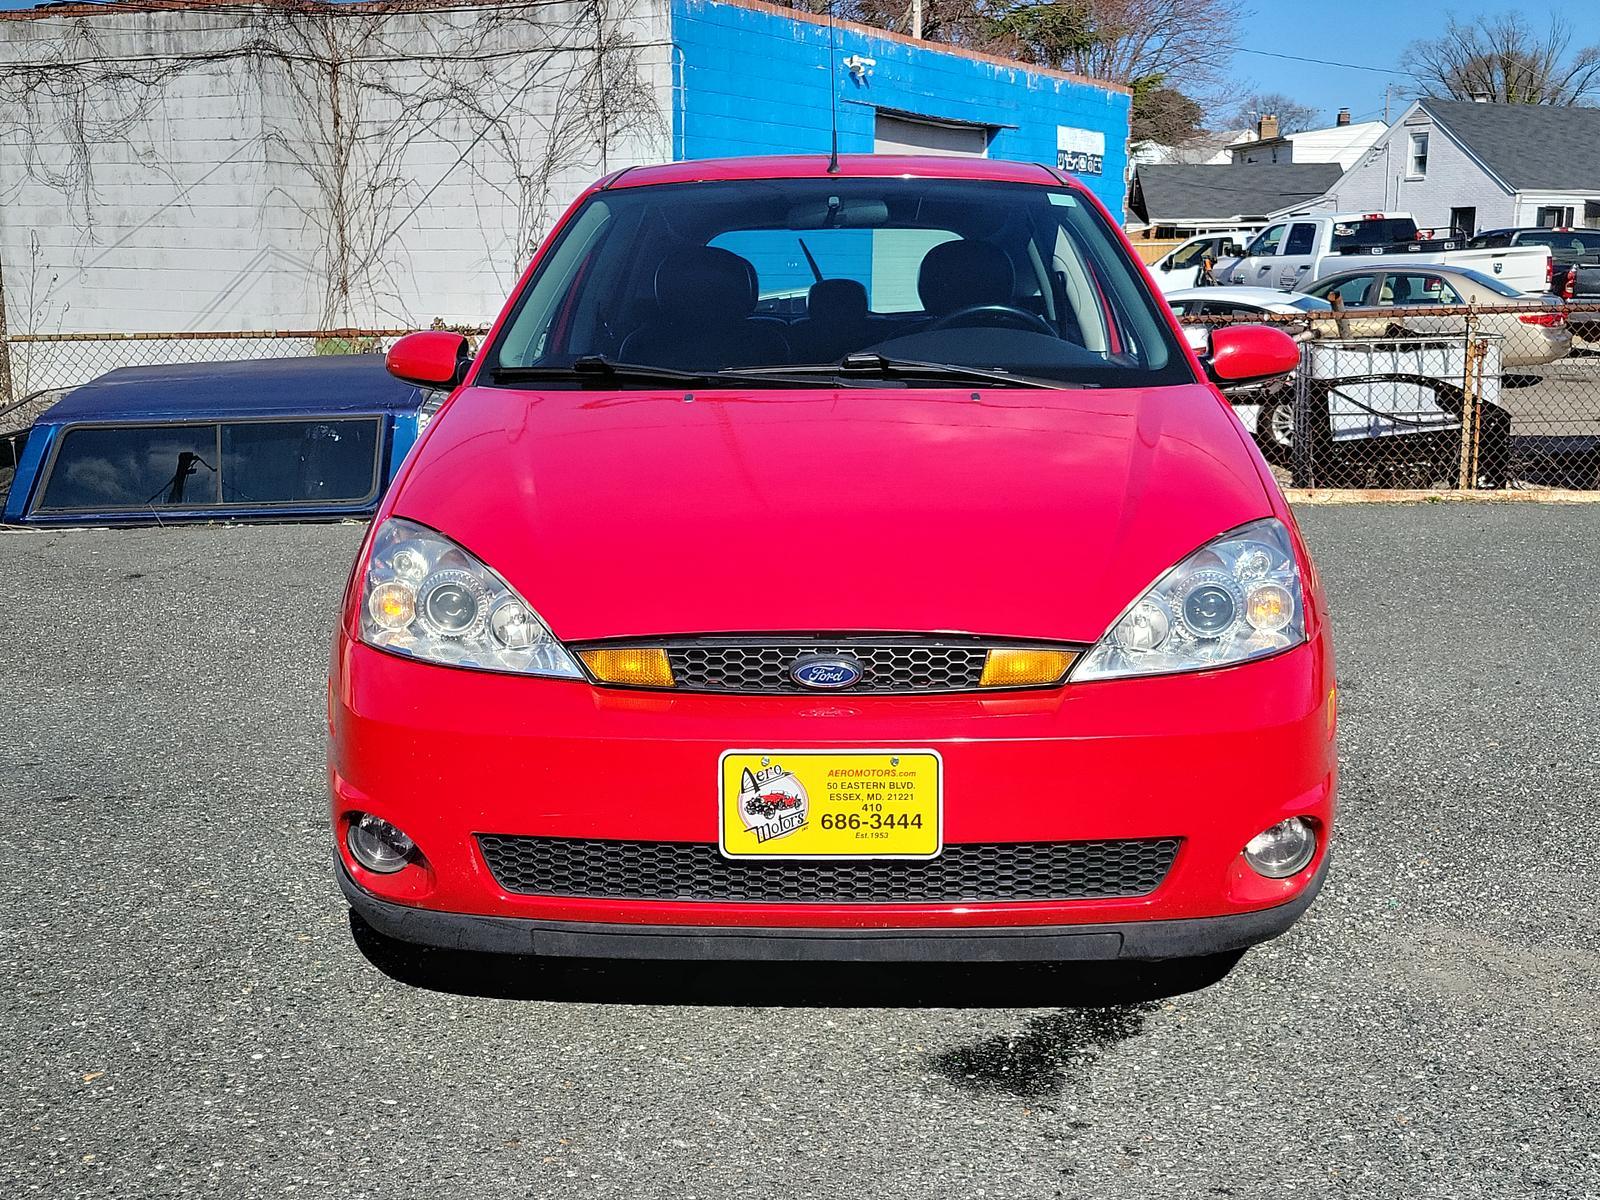 2003 Infra Red - E4 /Black/Red - R Ford Focus ZX5 Comfort (3FAHP37553R) , located at 50 Eastern Blvd., Essex, MD, 21221, (410) 686-3444, 39.304367, -76.484947 - <p>Our 2003 Ford Focus ZX5 Comfort Hatchback in Infra Red is a great choice for your active lifestyle! Powered by a 2.3 Liter 4 Cylinder generating 145hp connected to a 5 Speed Manual transmission. This Front Wheel Drive hatchback shows off with up to 33mpg on the highway and unique styling. Power m - Photo #1